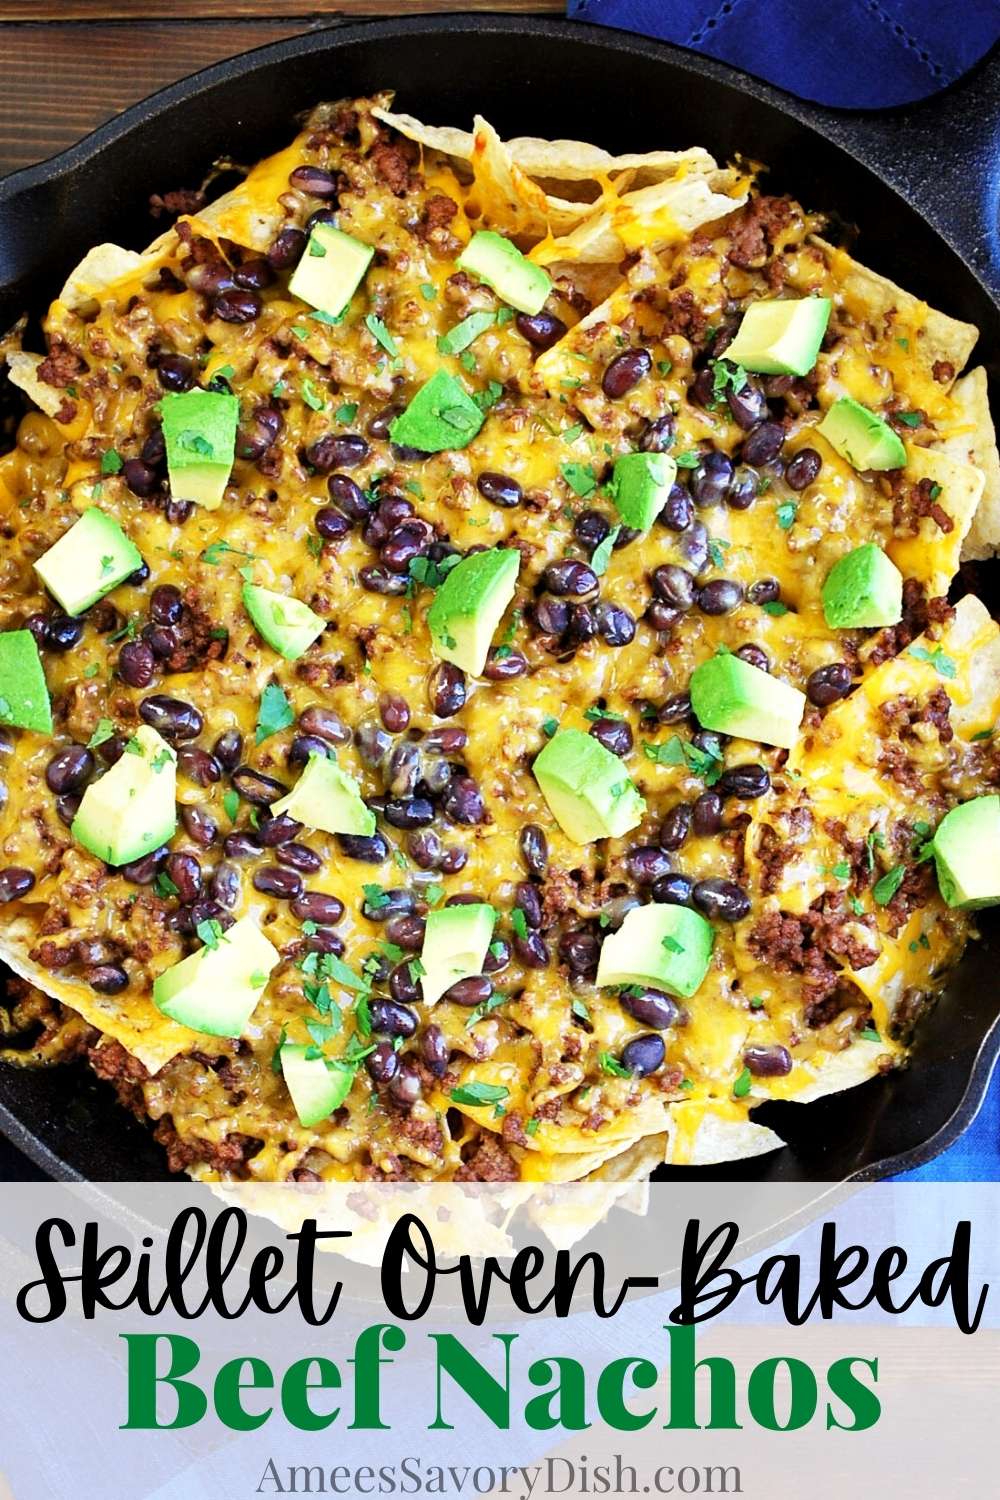 An easy and delicious oven-baked skillet nachos recipe made with tortilla chips, black beans, seasoned ground beef, and shredded cheese baked in a cast-iron skillet.  via @Ameessavorydish